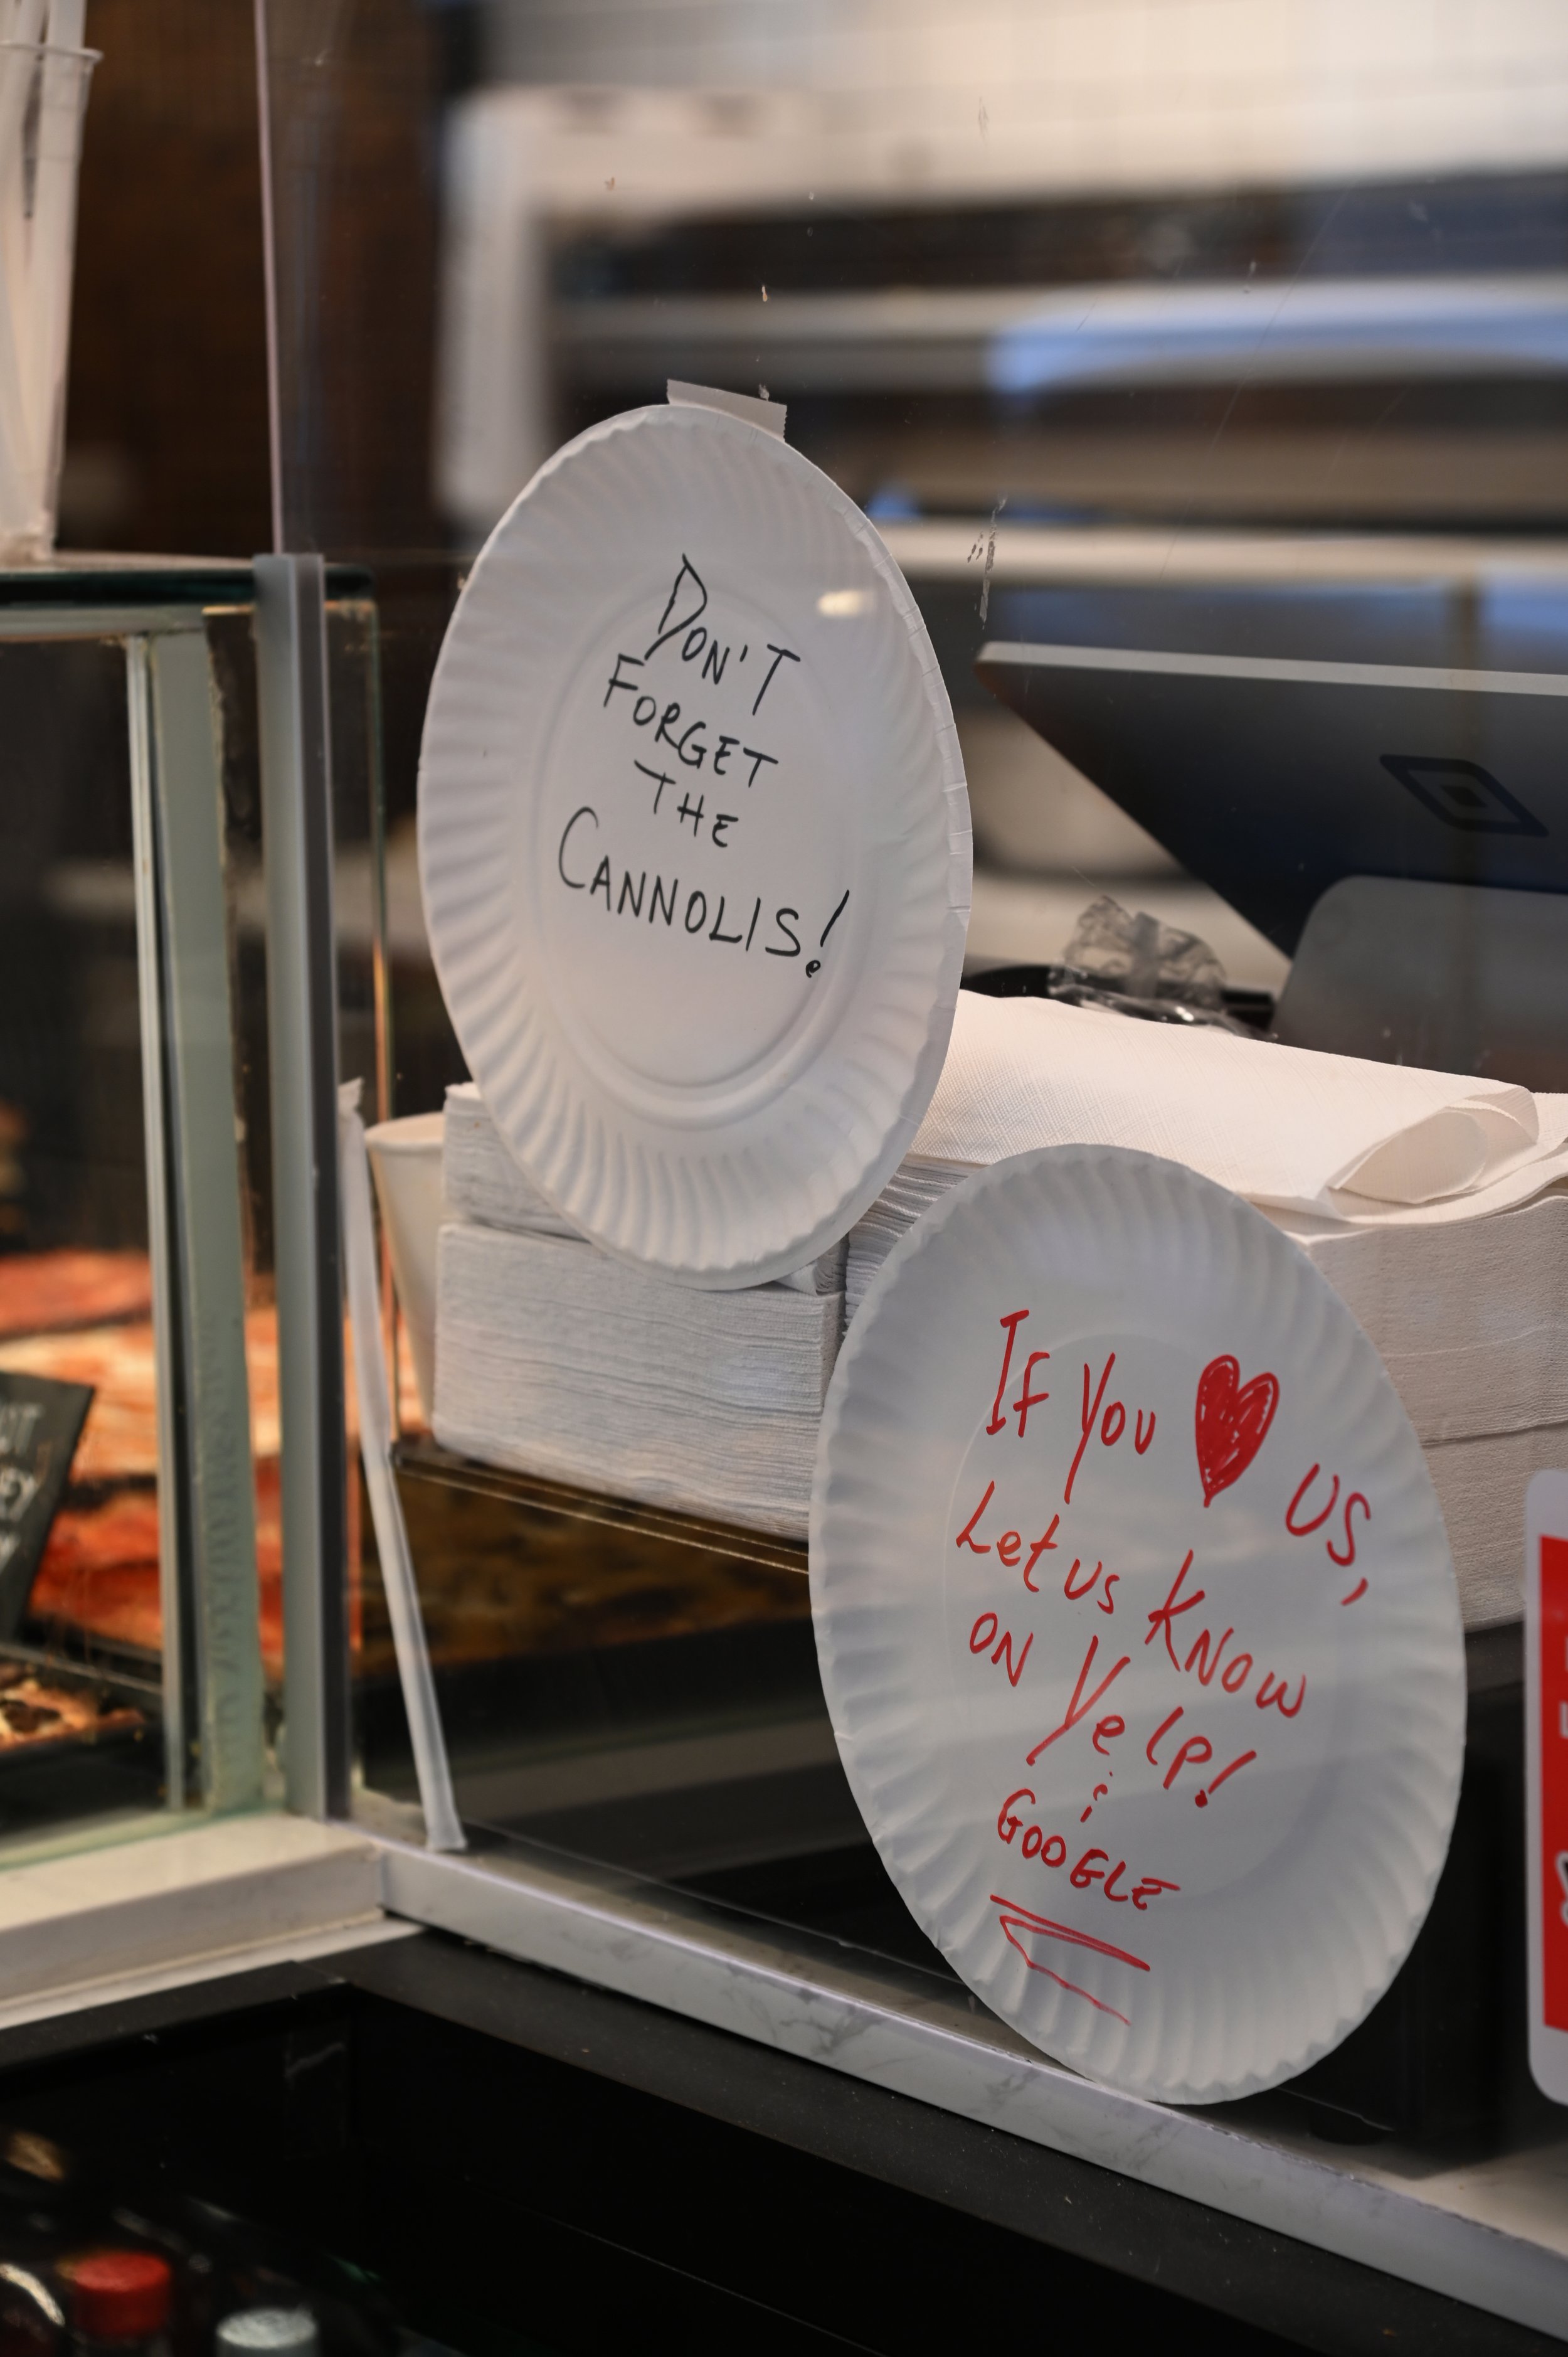  Siena Pizza and Cannoli, the family-owned business made signs from paper plates, reminding customers to grab a cannoli with their pizza and to leave reviews on Yelp on Oct. 12, 2021  in the Financial District of Manhattan, NY, (Alyse Messmer/The Kin